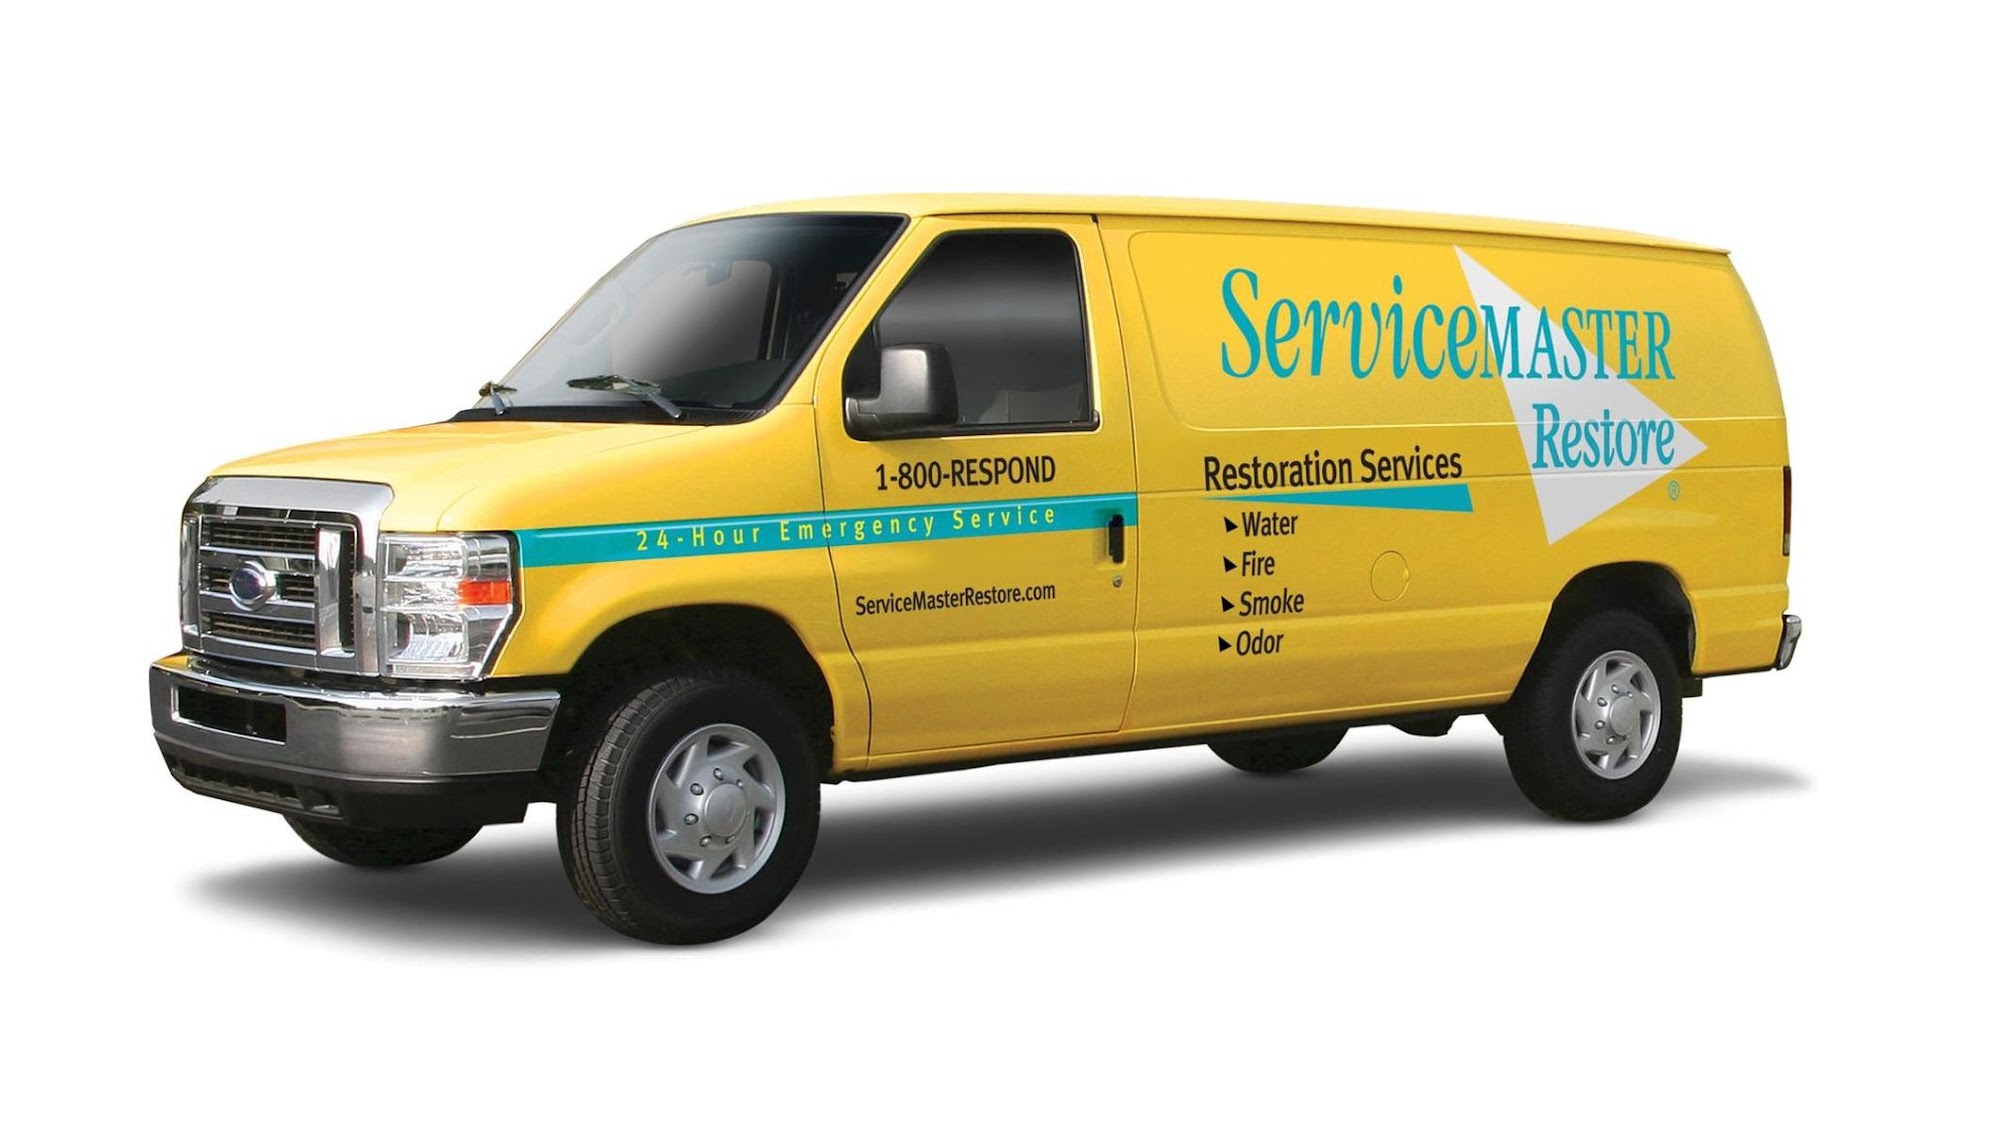 ServiceMaster Recovery by AHR